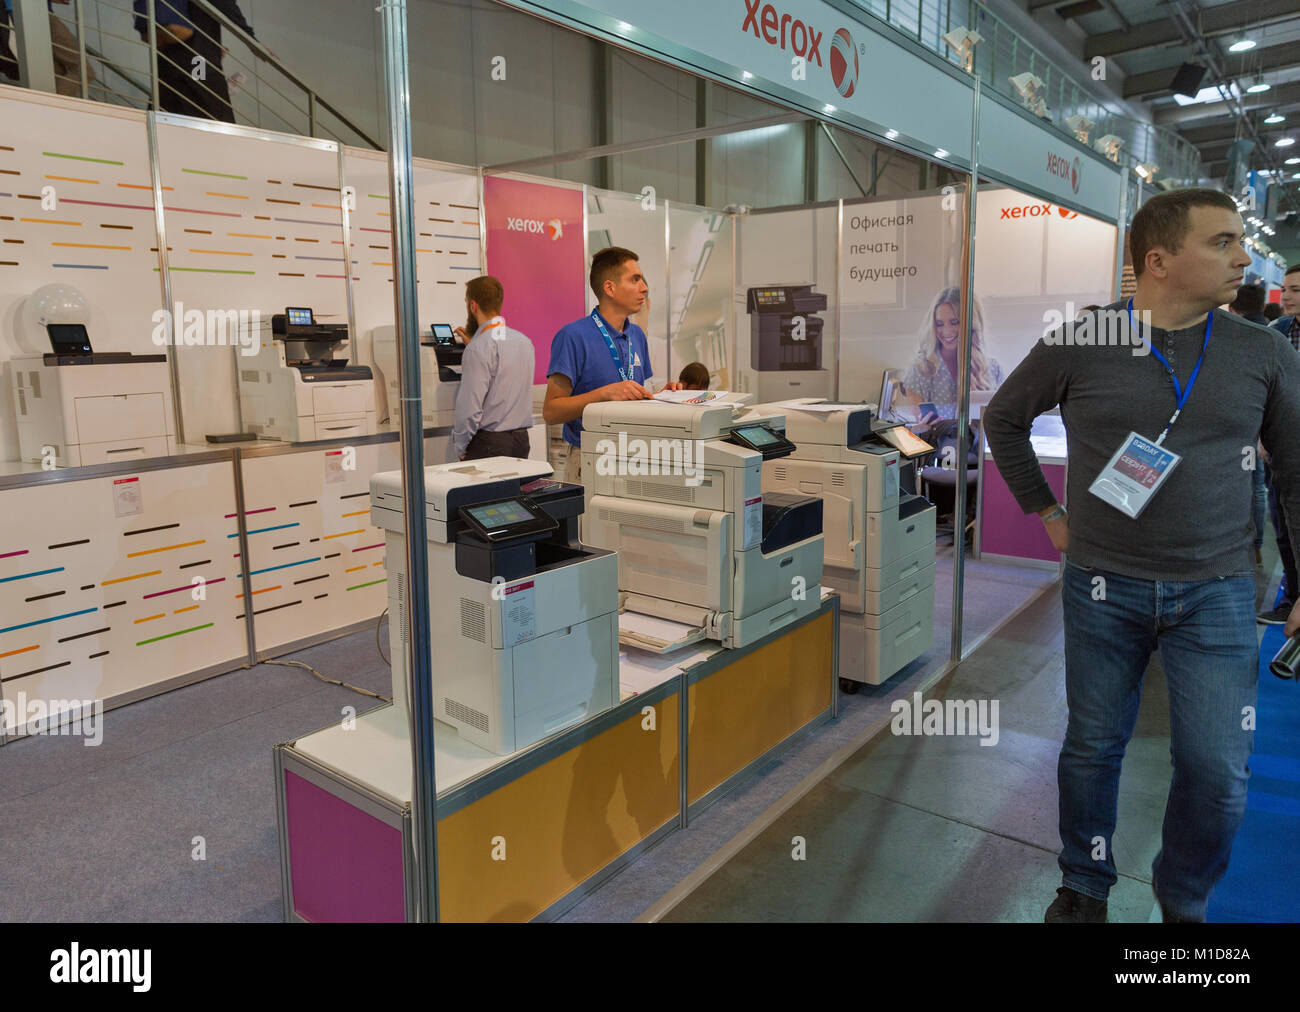 KIEV, UKRAINE - OCTOBER 07, 2017: People visit Xerox, American global corporation that sells print and digital document solutions booth at CEE 2017, e Stock Photo